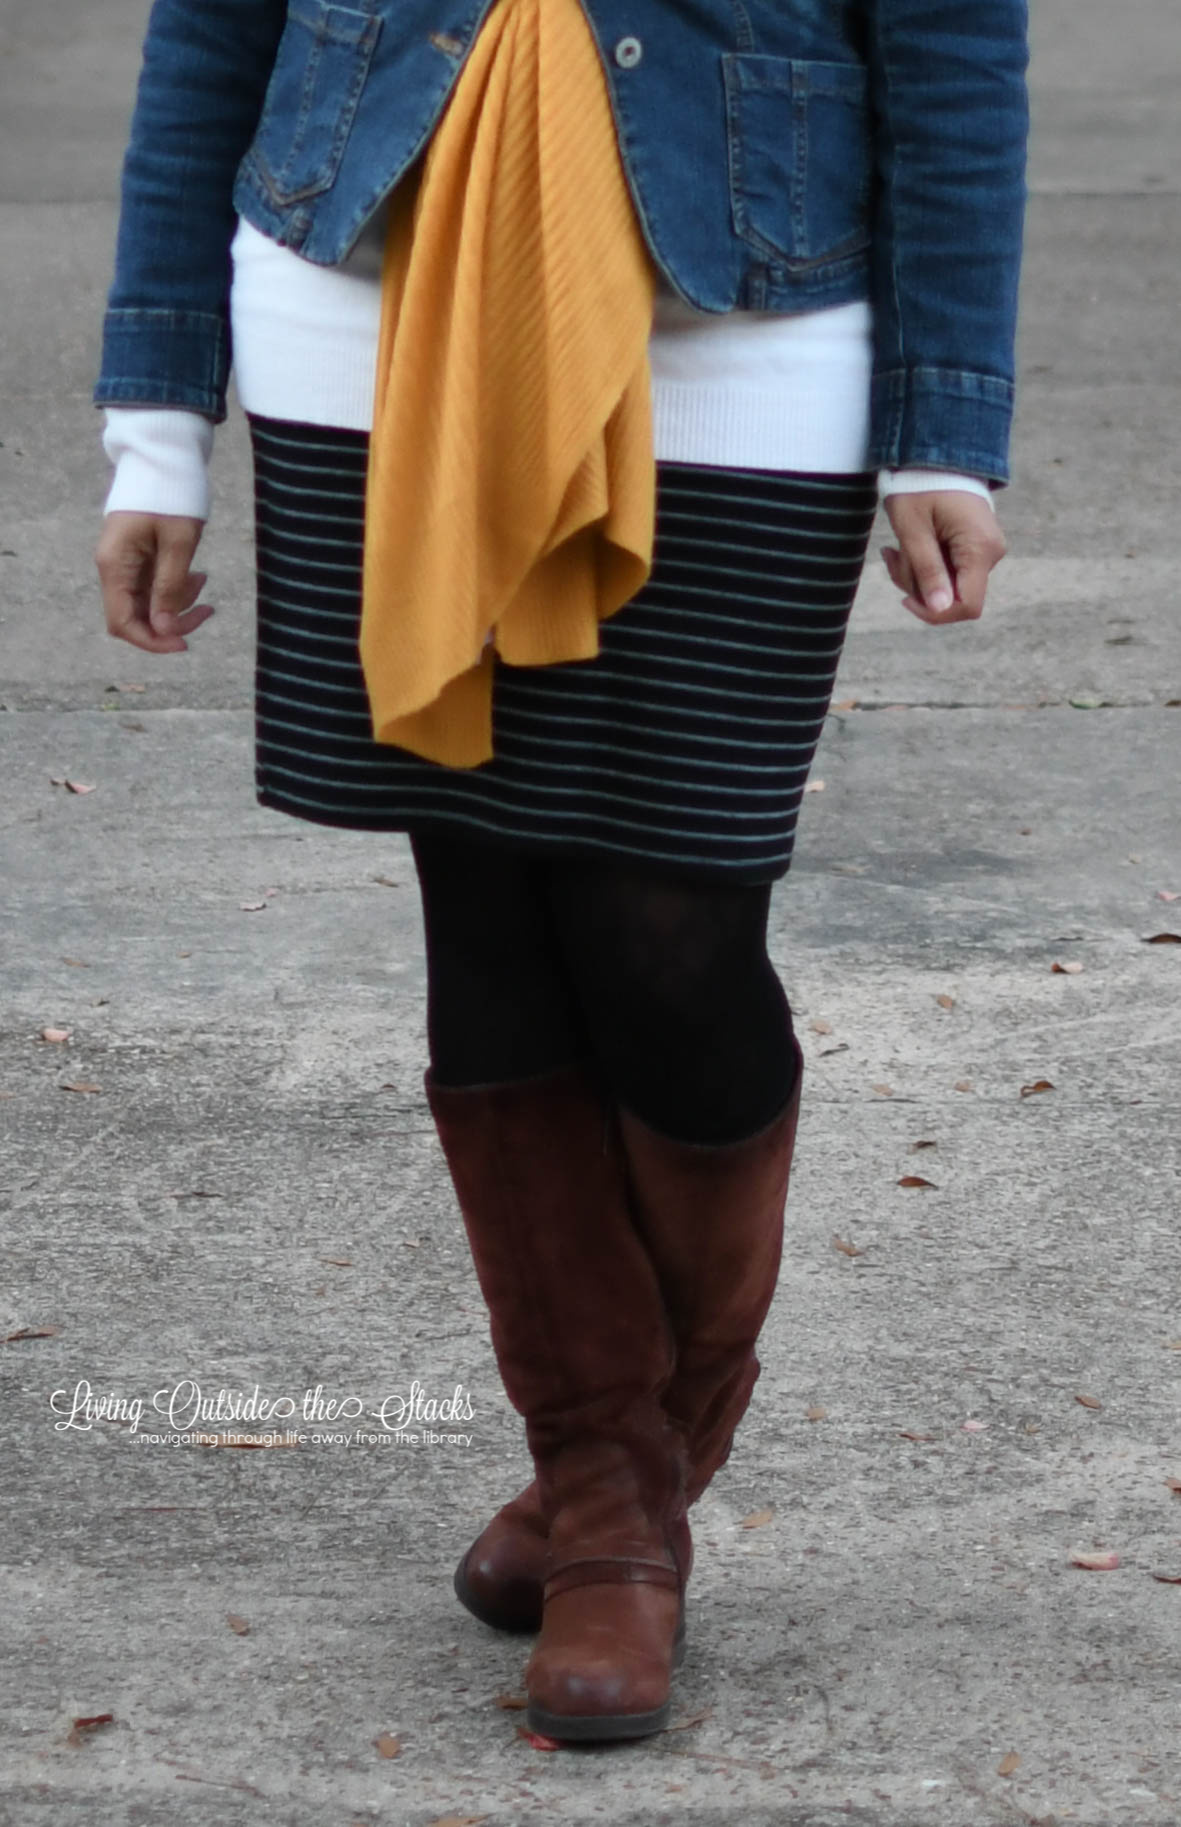  Zenni Glasses Mustard Scarf Denim Jacket Striped Skirt Black Tights and Brown Boots {living outside the stacks}